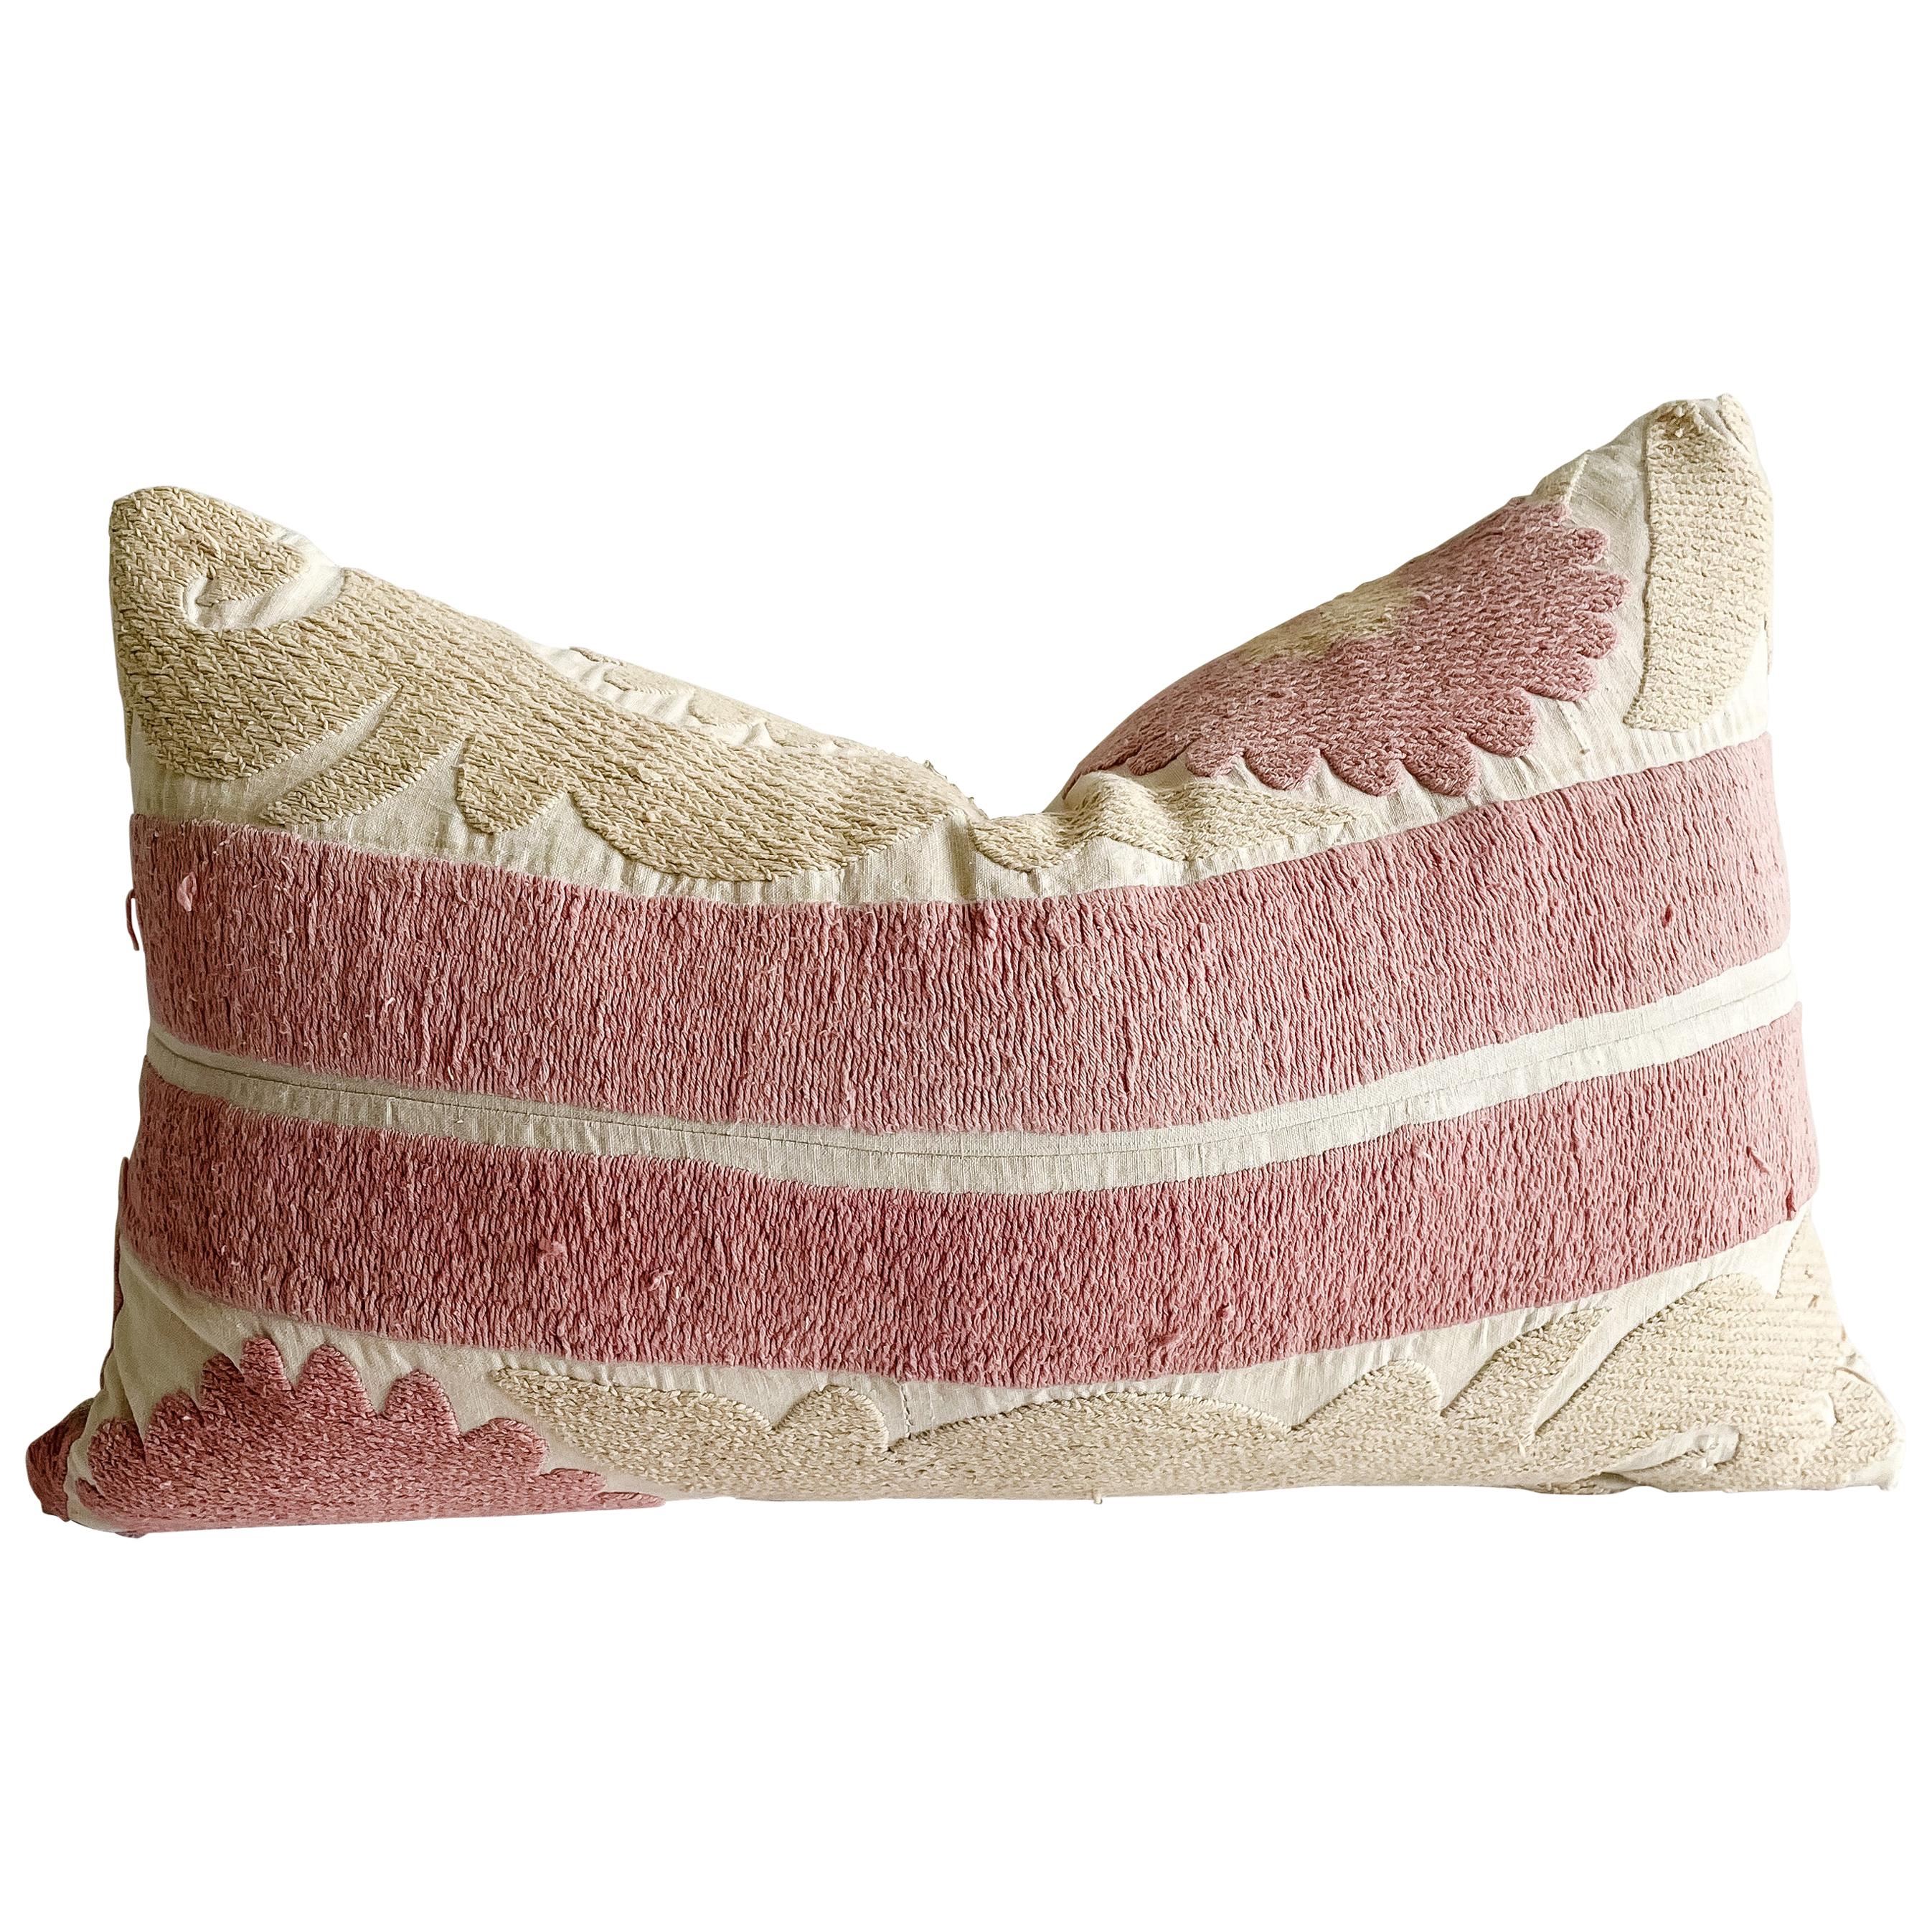 Vintage Pale Pink and Tan Embroidered Suzani Accent Pillow